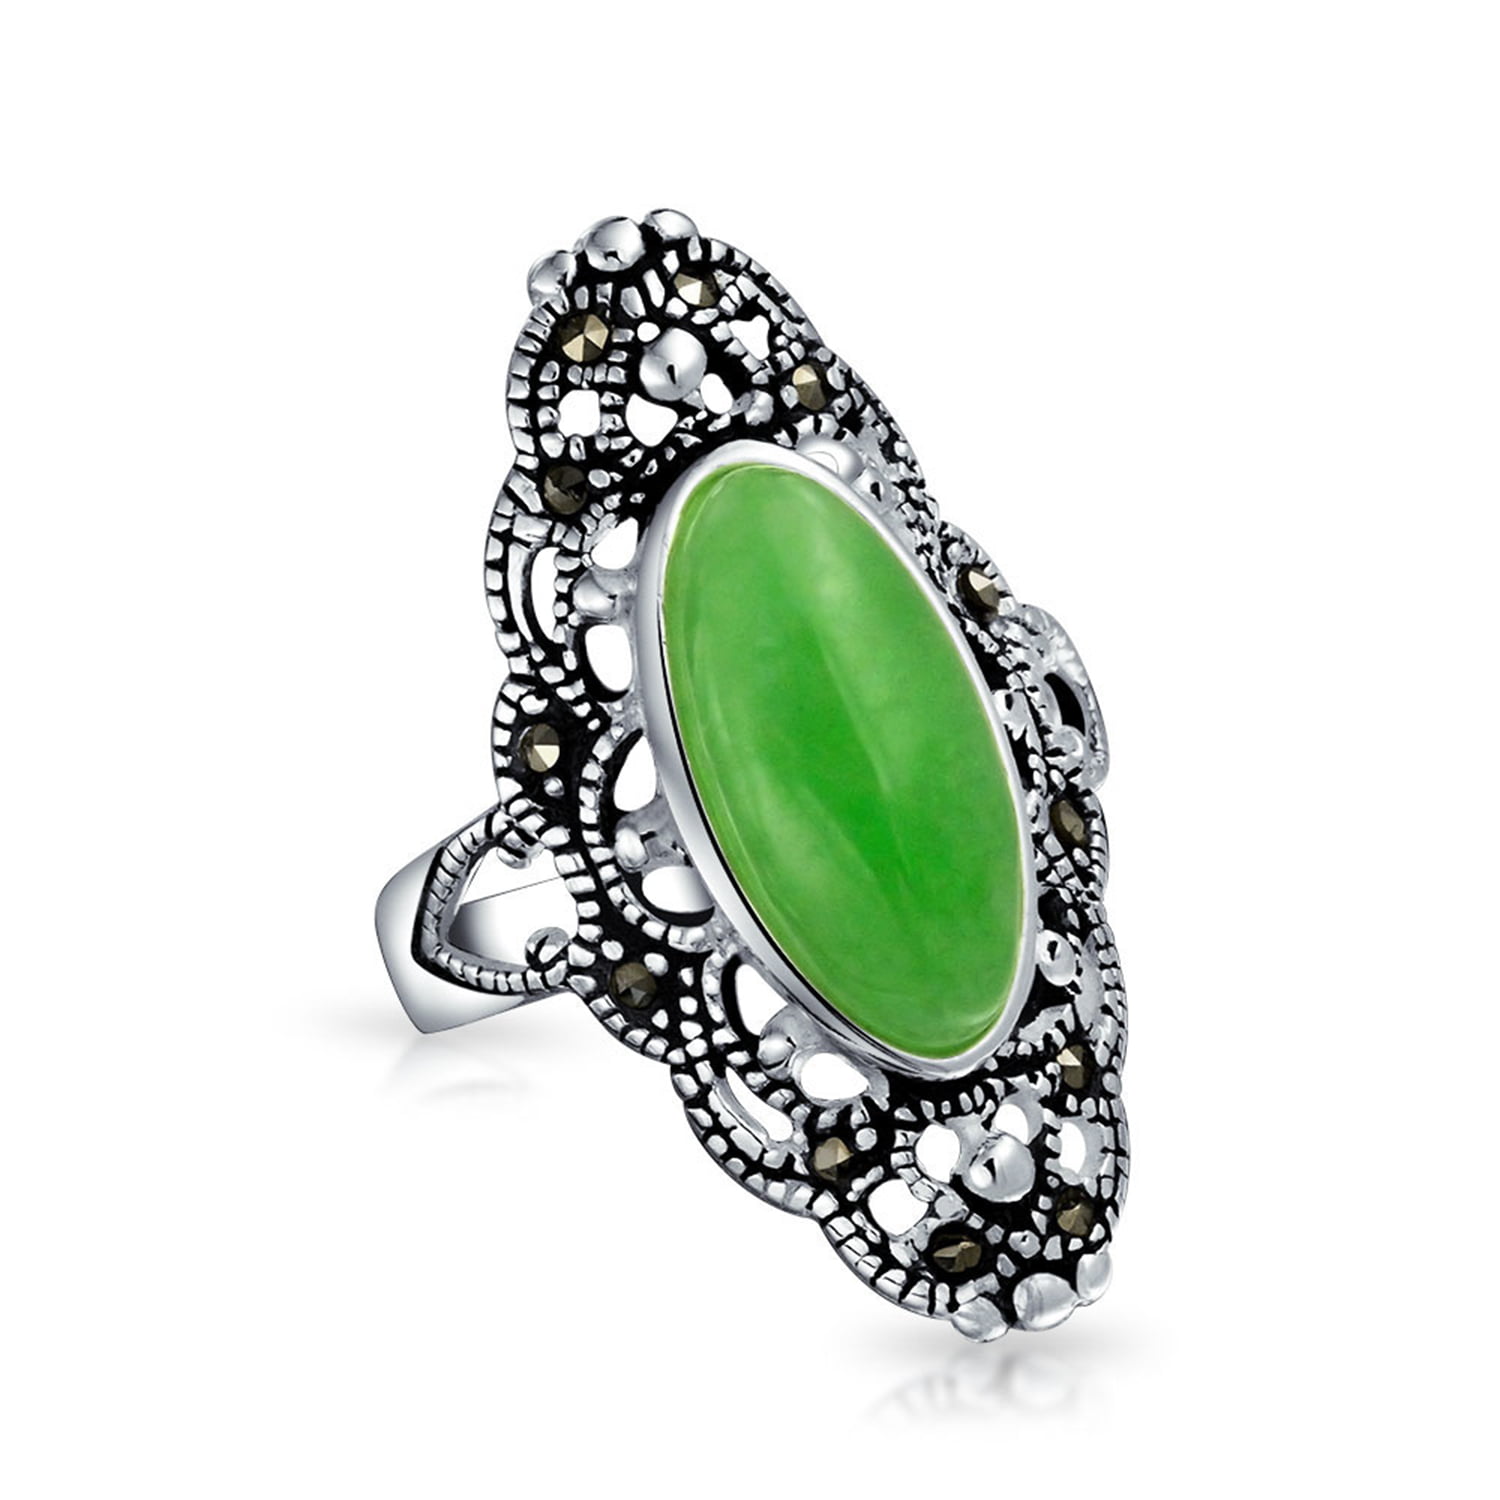 925 Sterling Silver Art Nouveau Green Jade & Marcasite Statement Ring 